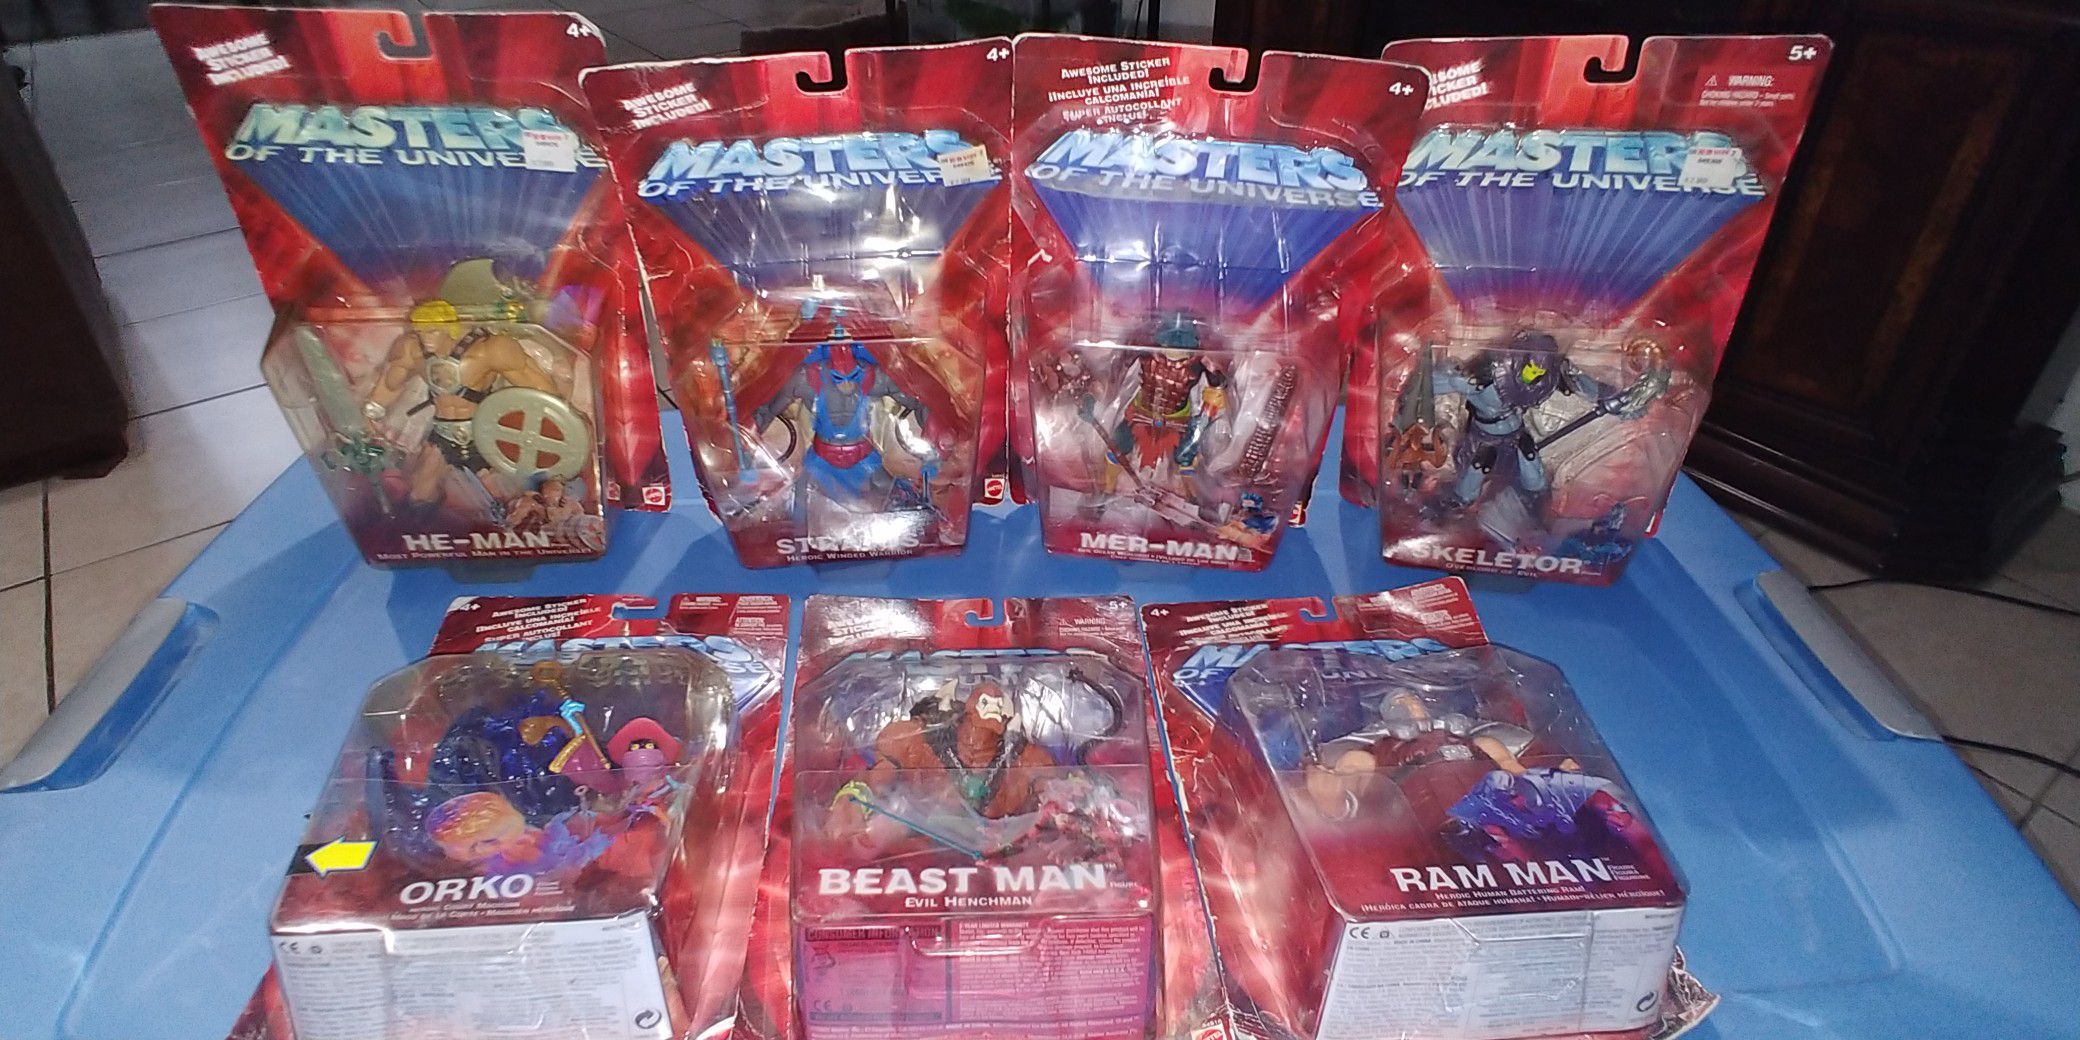 MASTERS OF THE UNIVERSE HE-MAN ACTION FIGURE COLLECTION..7 PCS $100 FIRM!!!